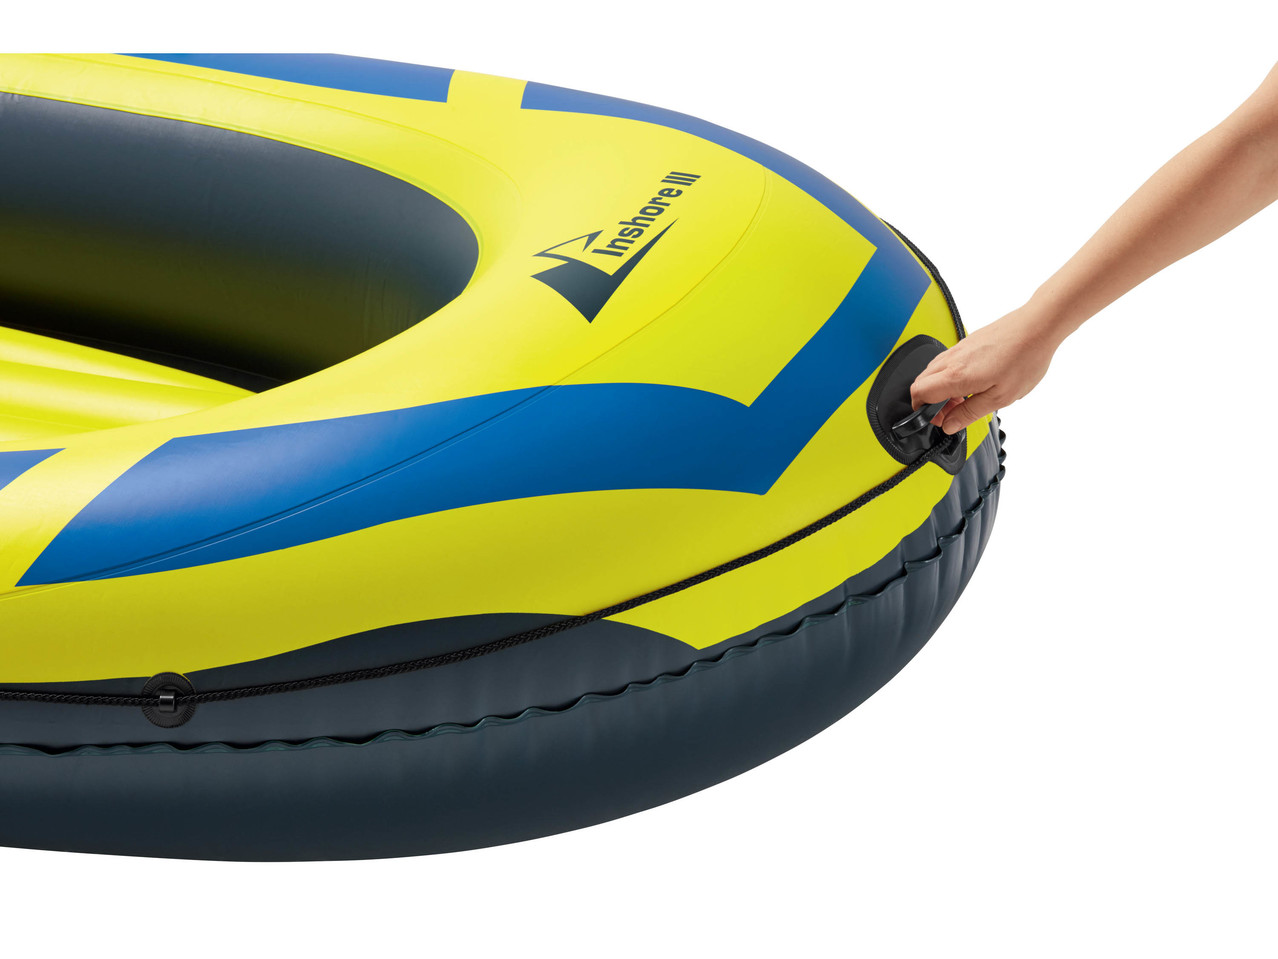 CRIVIT Dinghy / 2-Person Inflatable Kayak*